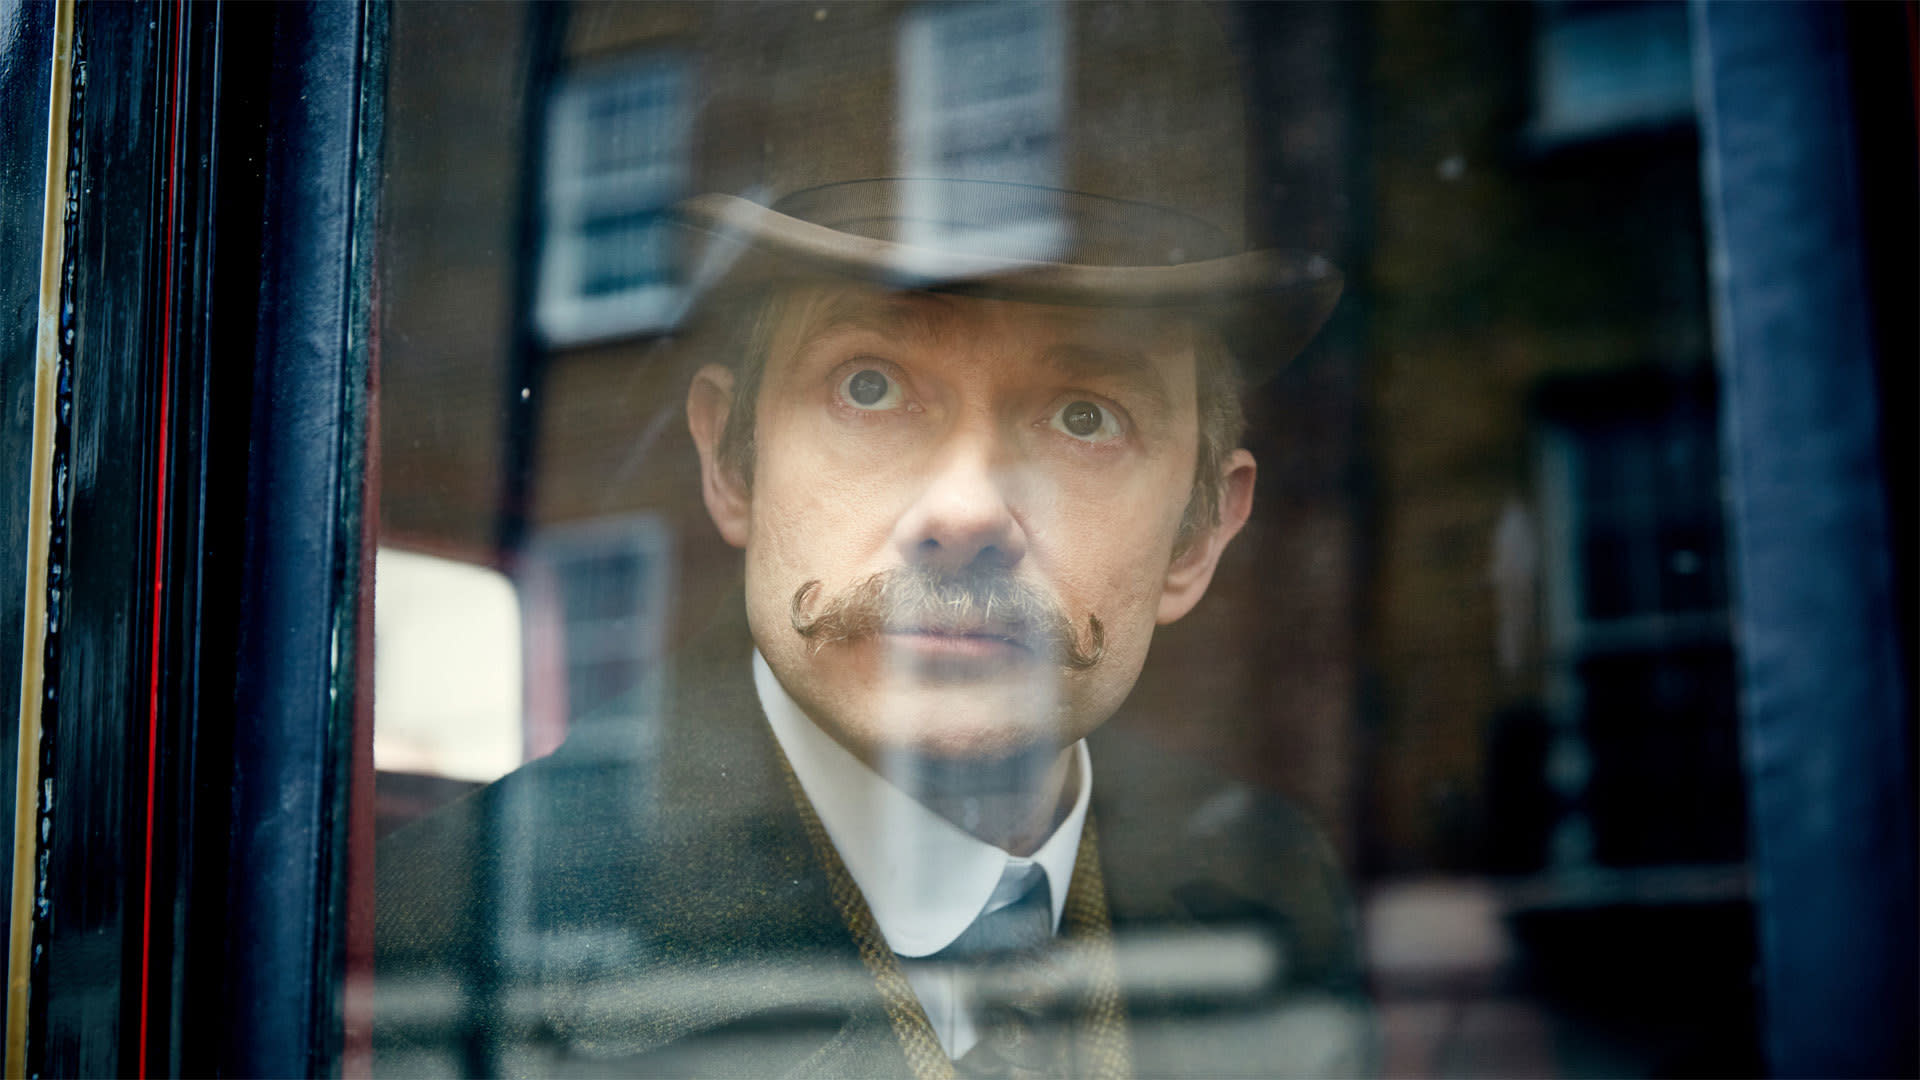 when can americans watch sherlock the abominable bride